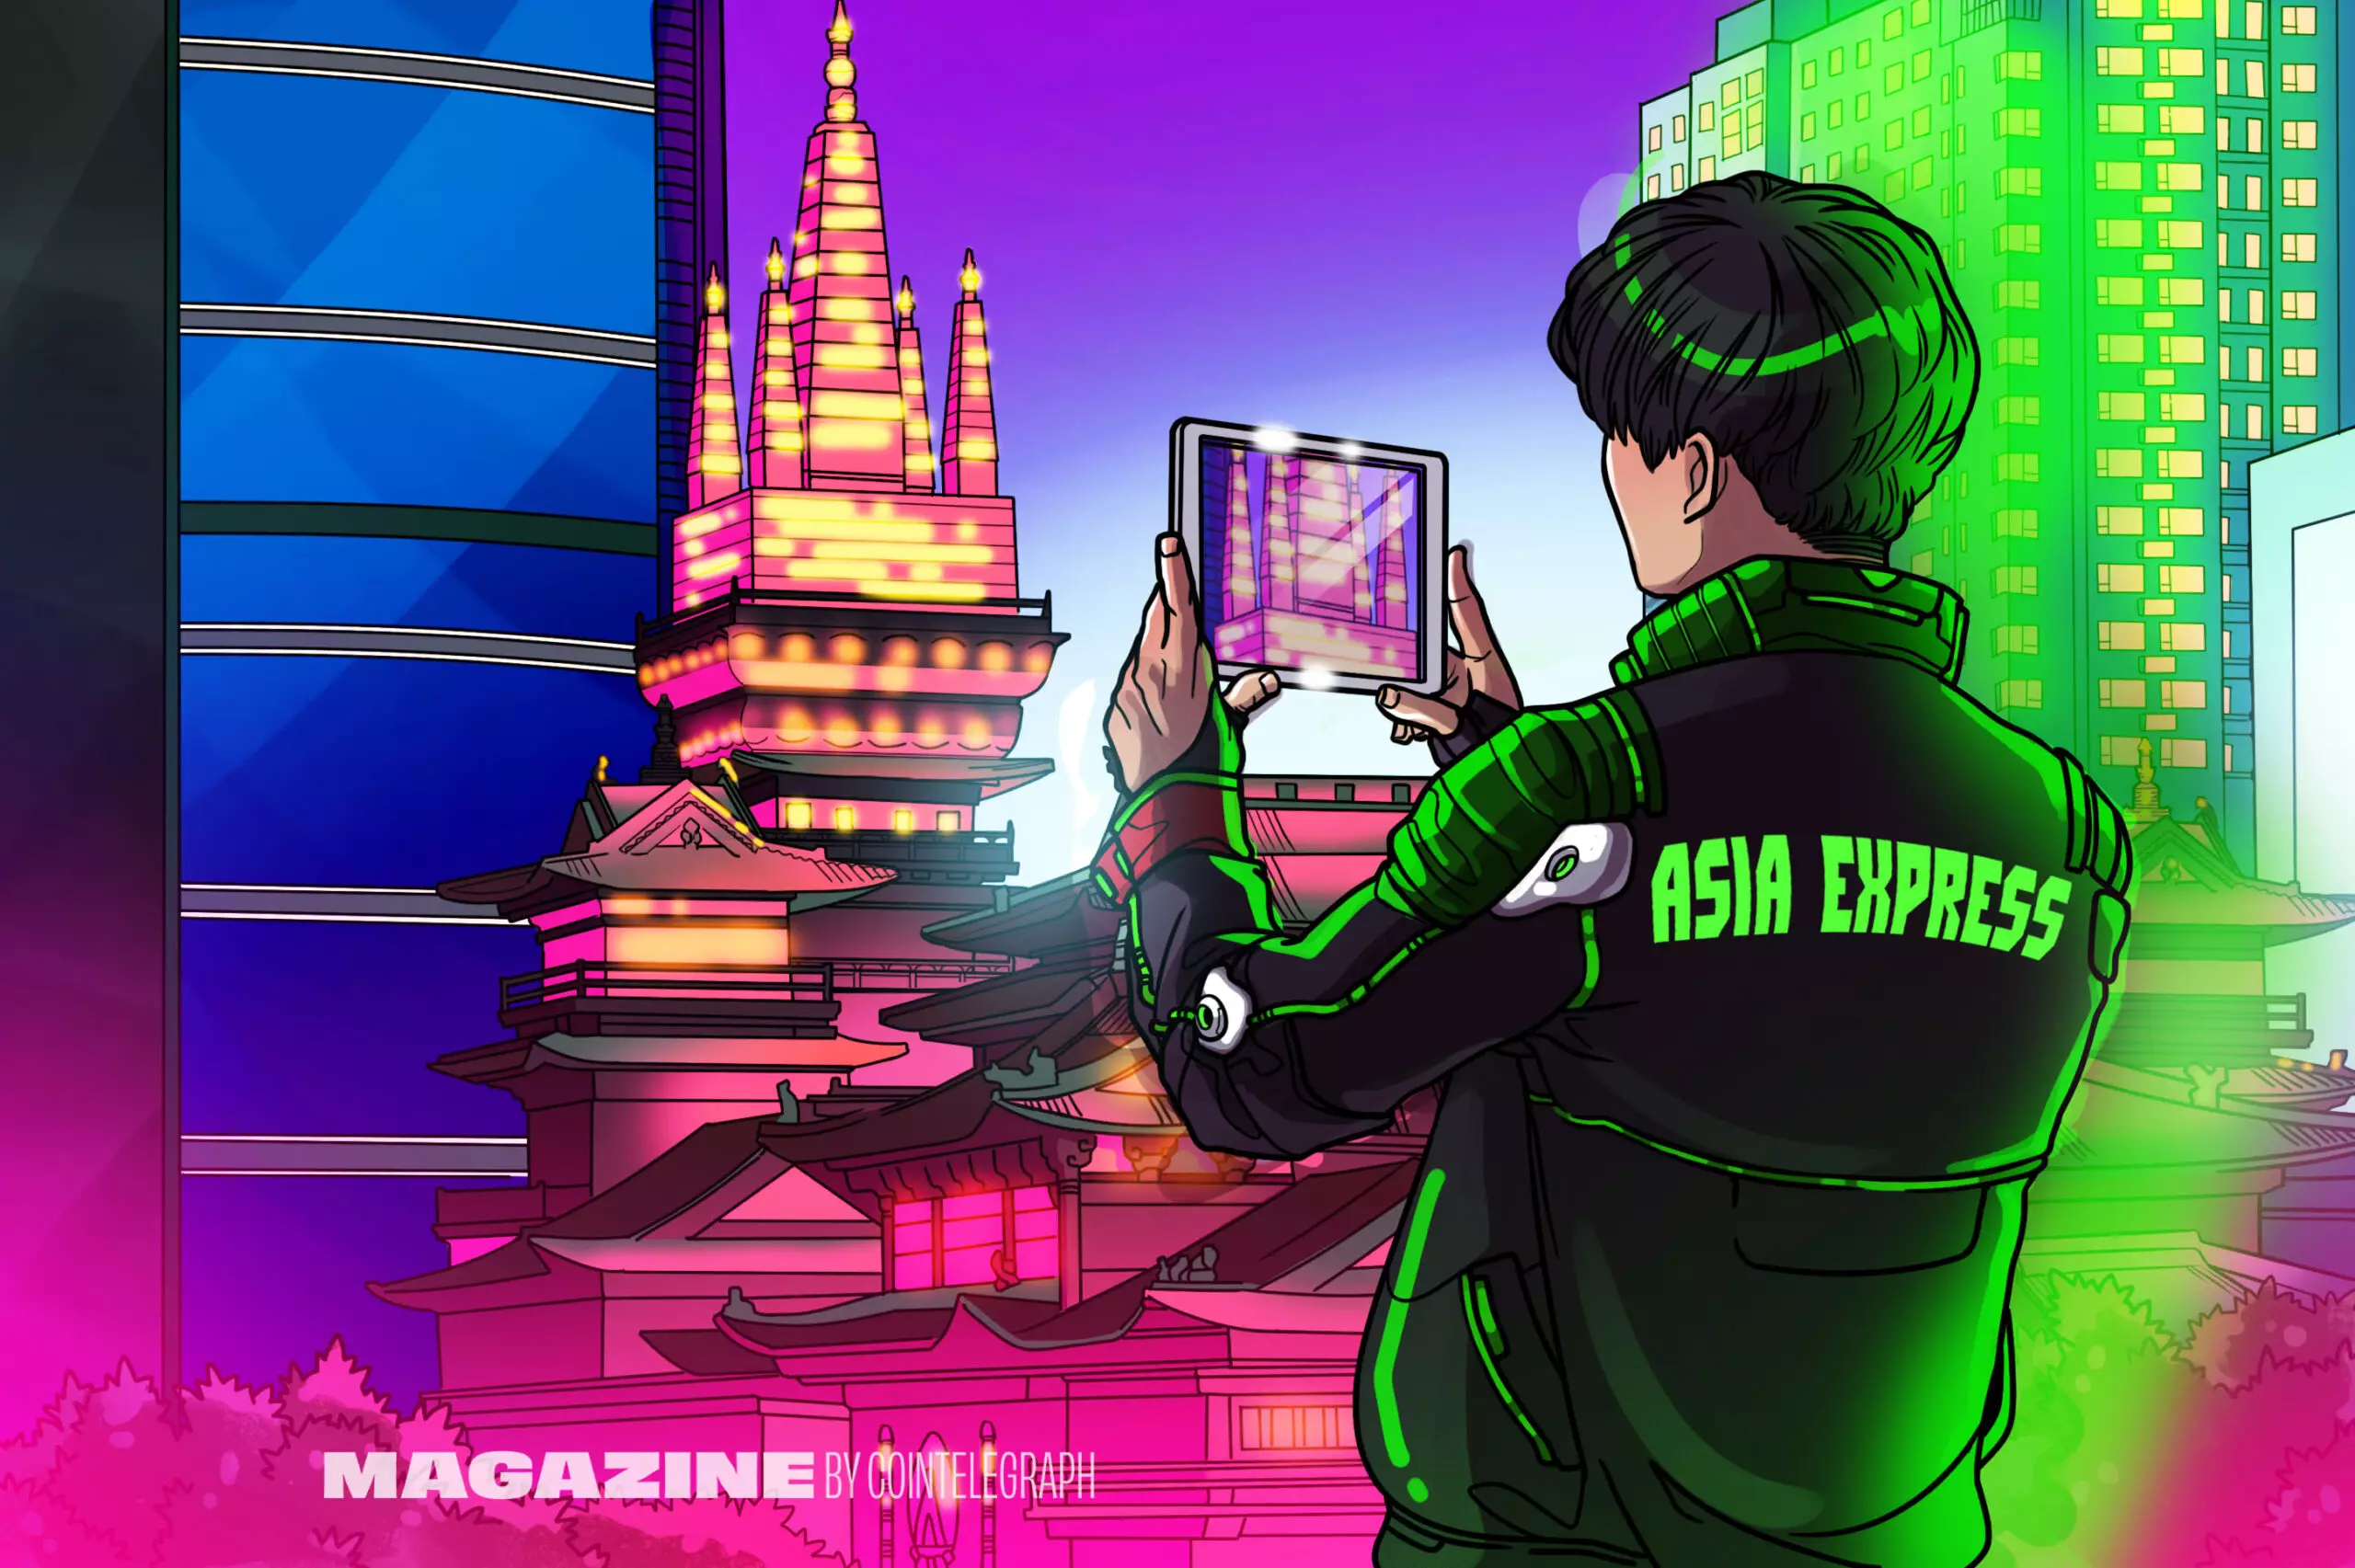 The Latest Developments in East Asia: From VPN Fines to Crypto Exchange Collapse